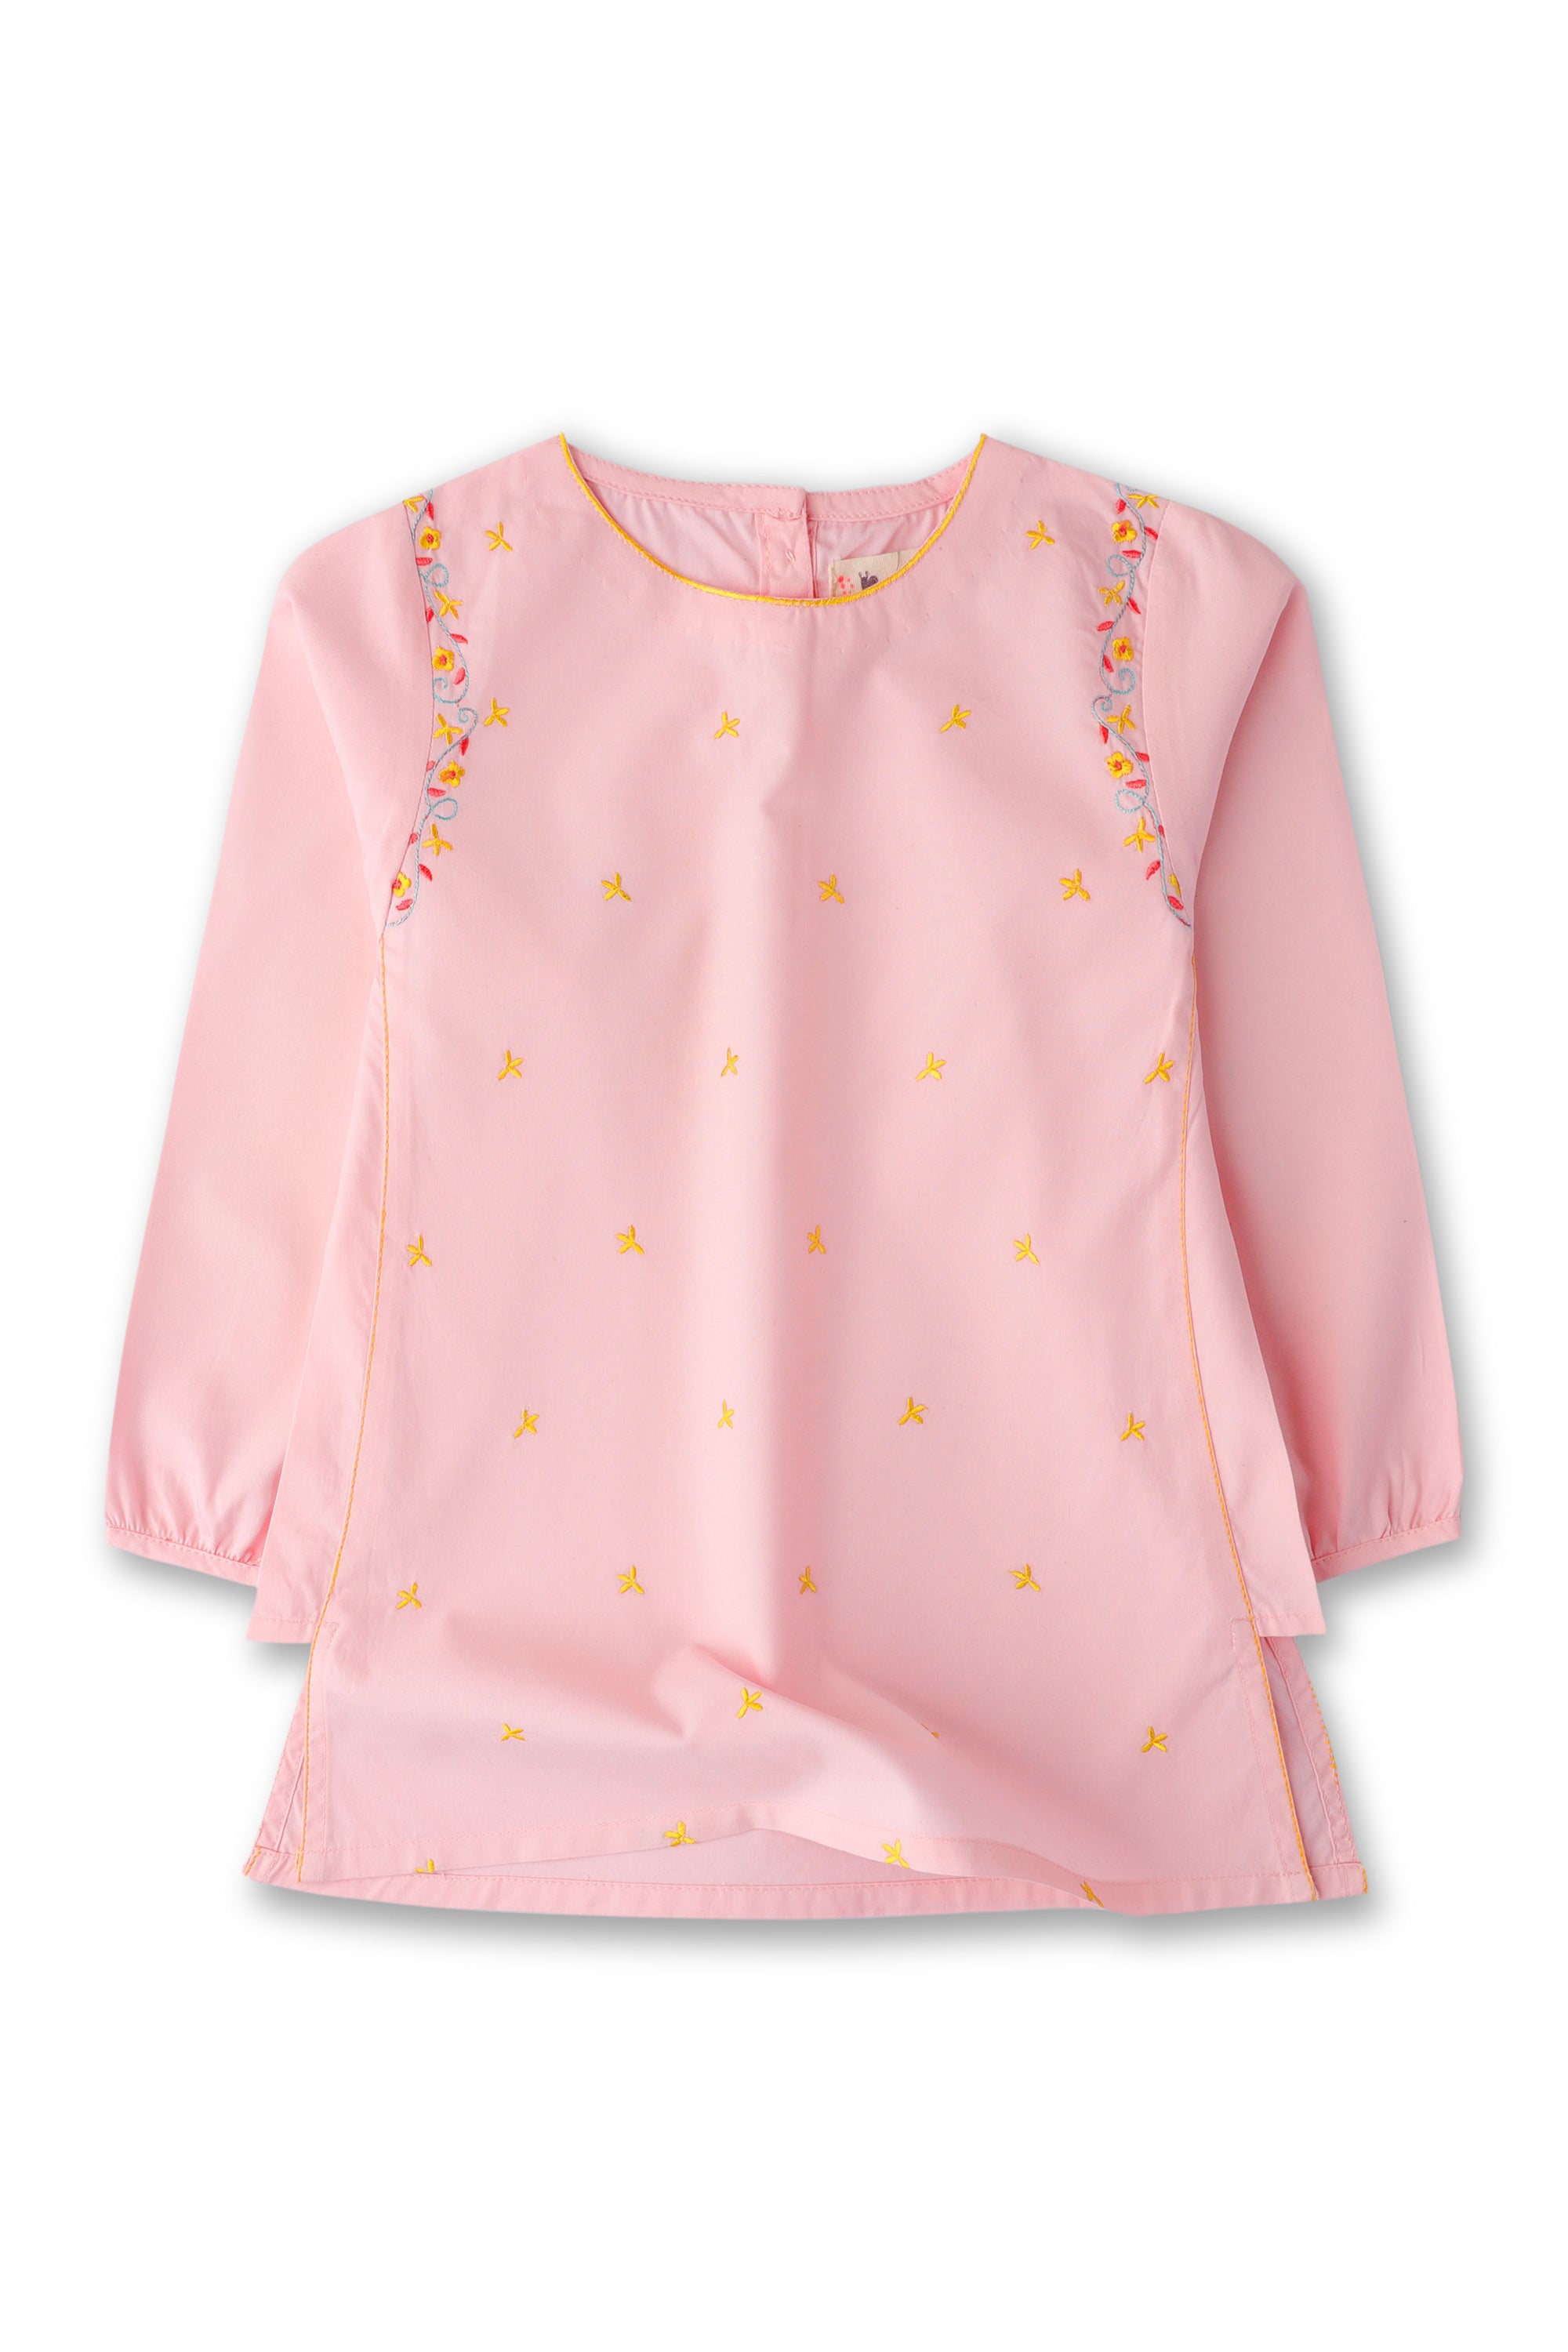 Girls Pink Embroidered Top